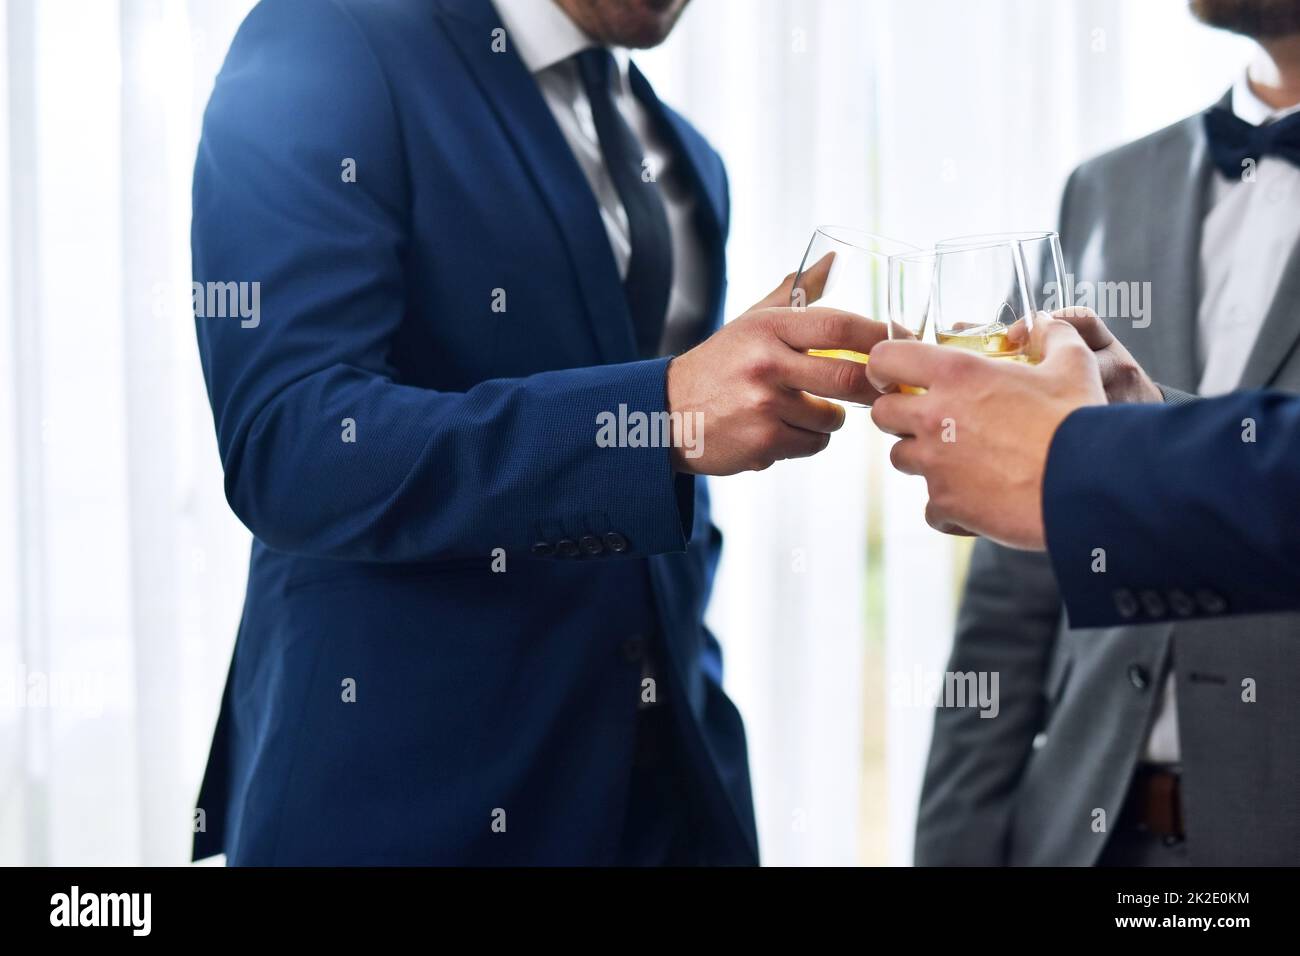 We wish you a lifetime of love and happiness buddy. Shot of two unrecognizable groomsmen sharing a toast with the bridegroom on his wedding day. Stock Photo